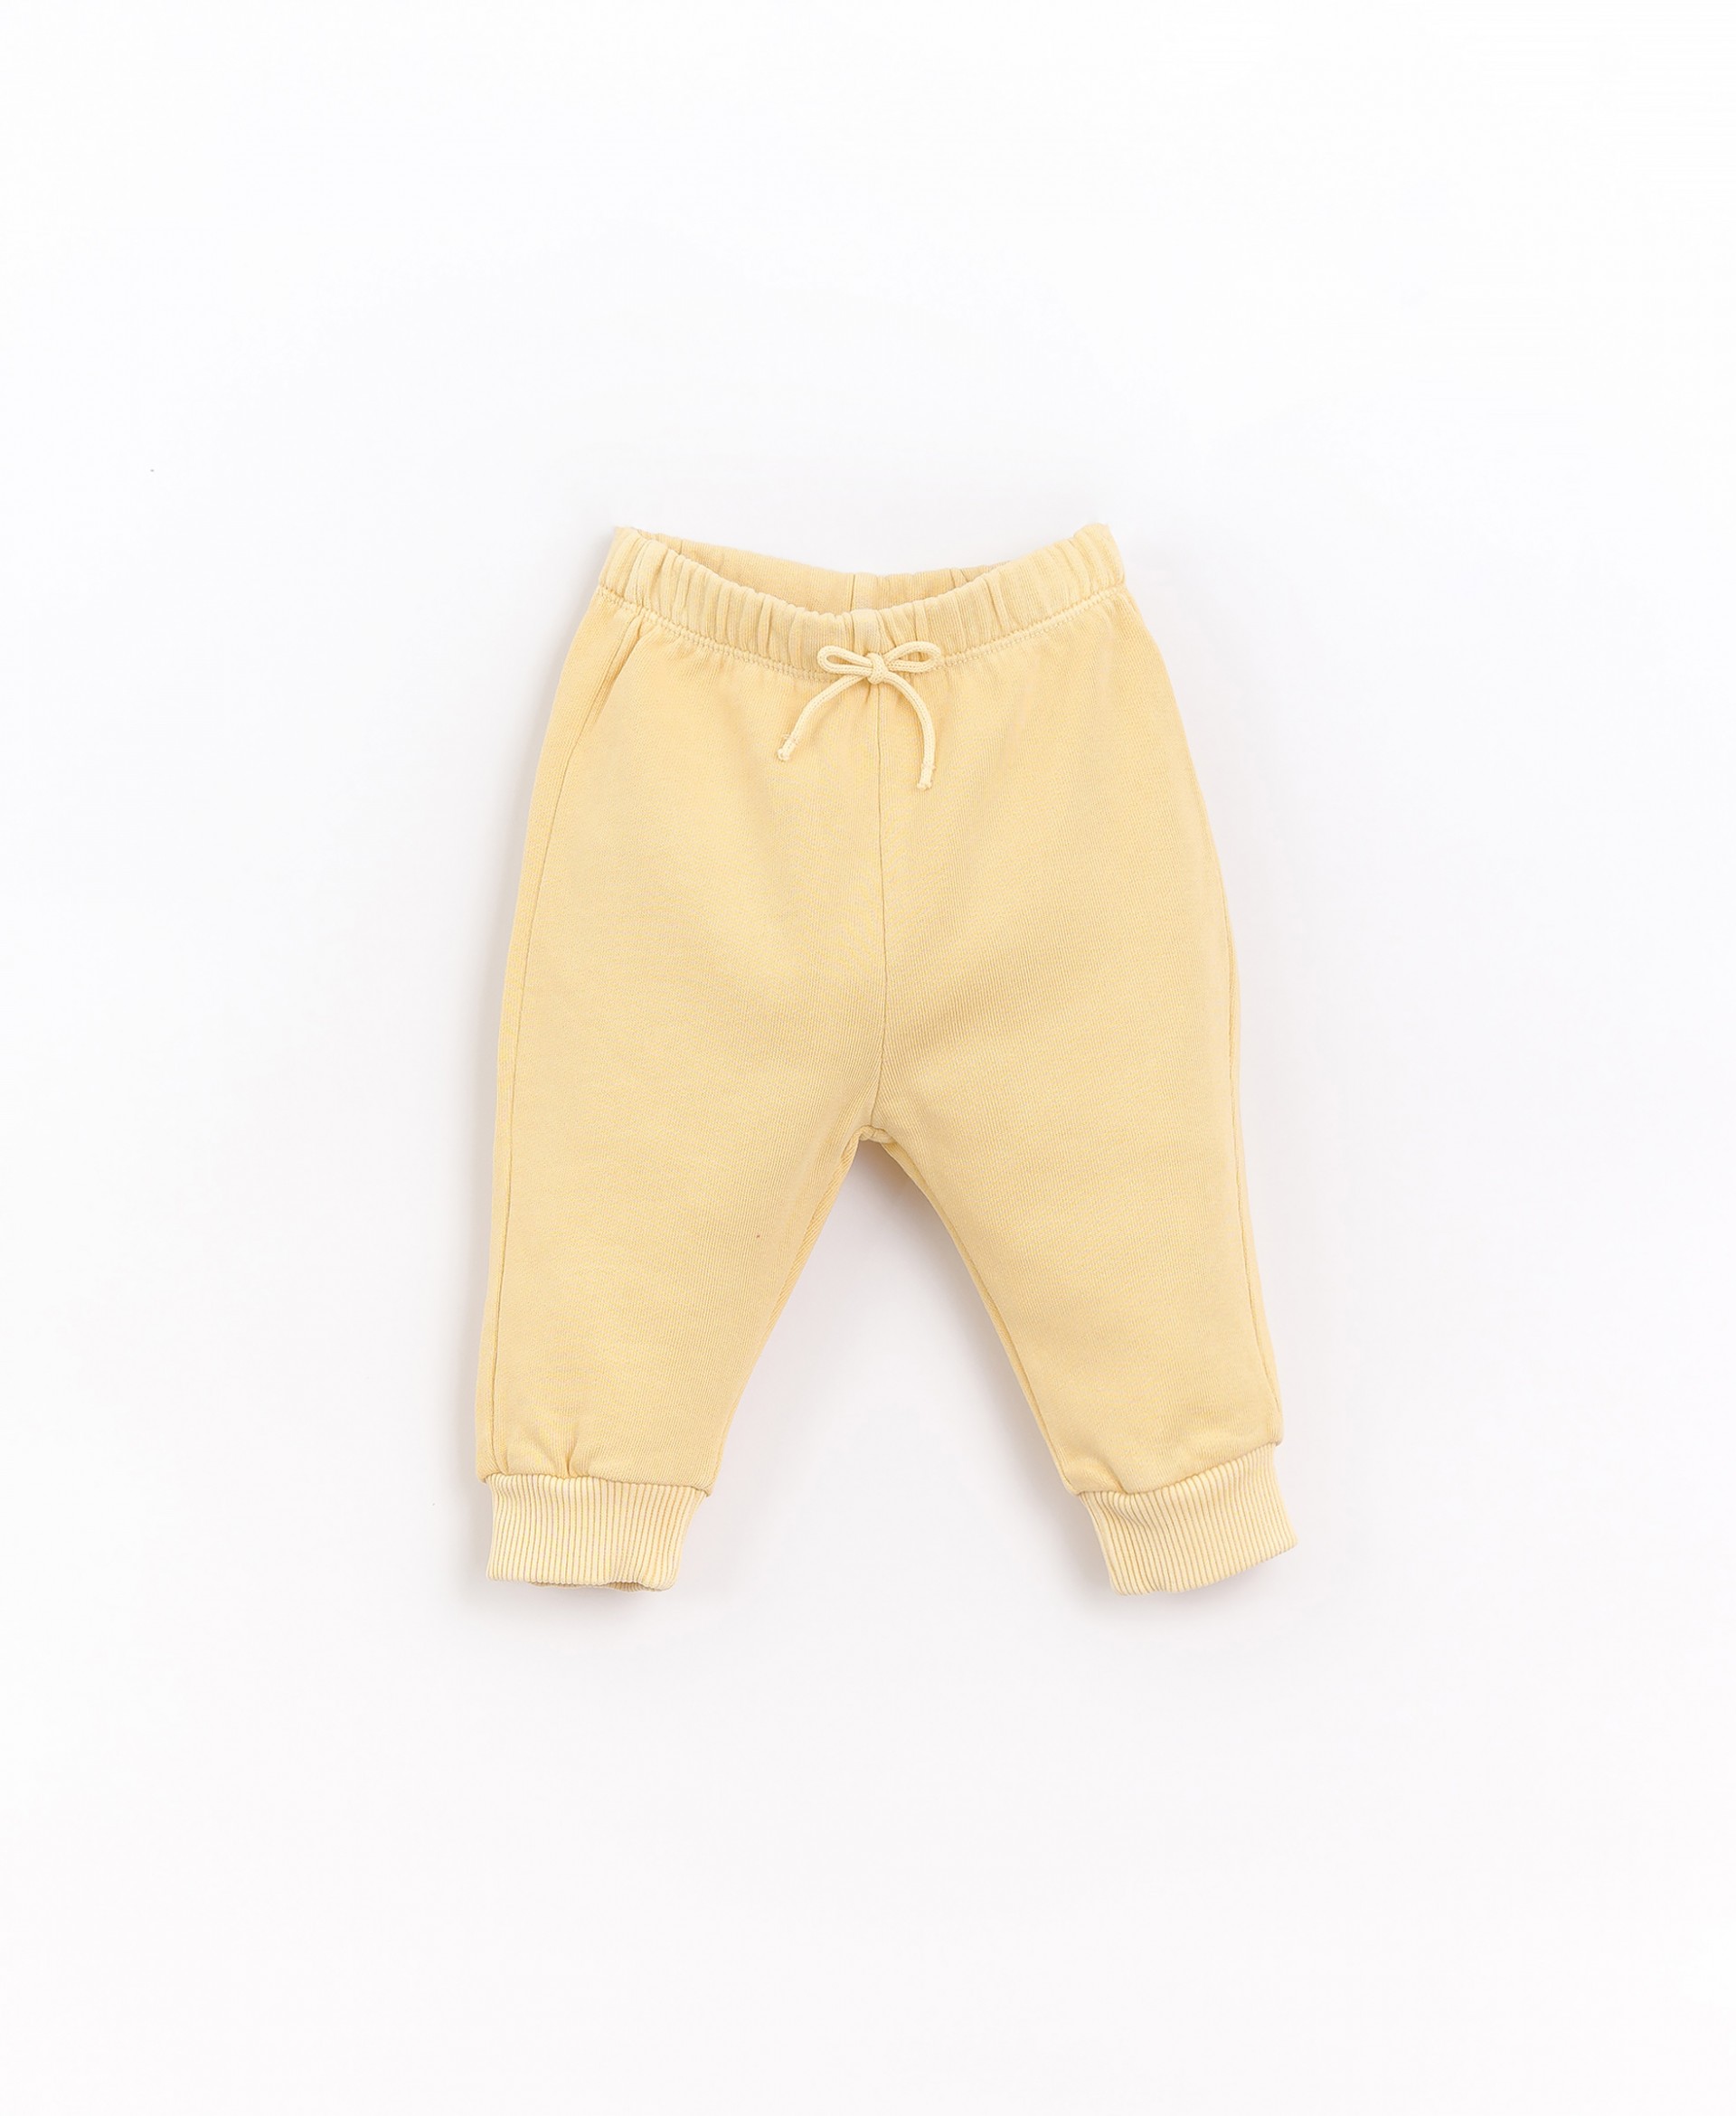 Jersey pants with elastic cuff | Basketry